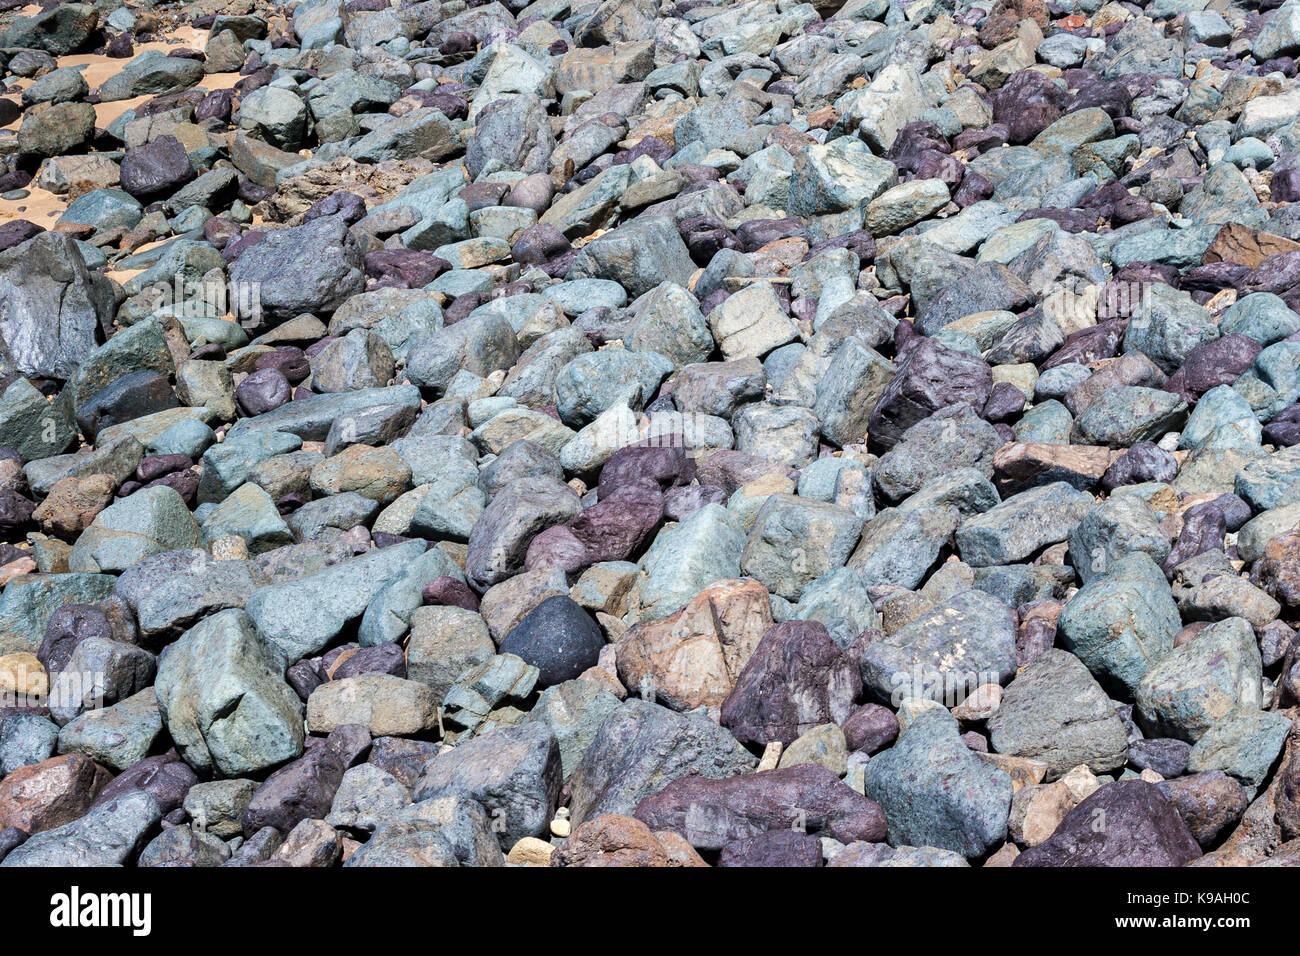 Pebbles on the beach in lovely shades of blue, grey and purple. Stock Photo